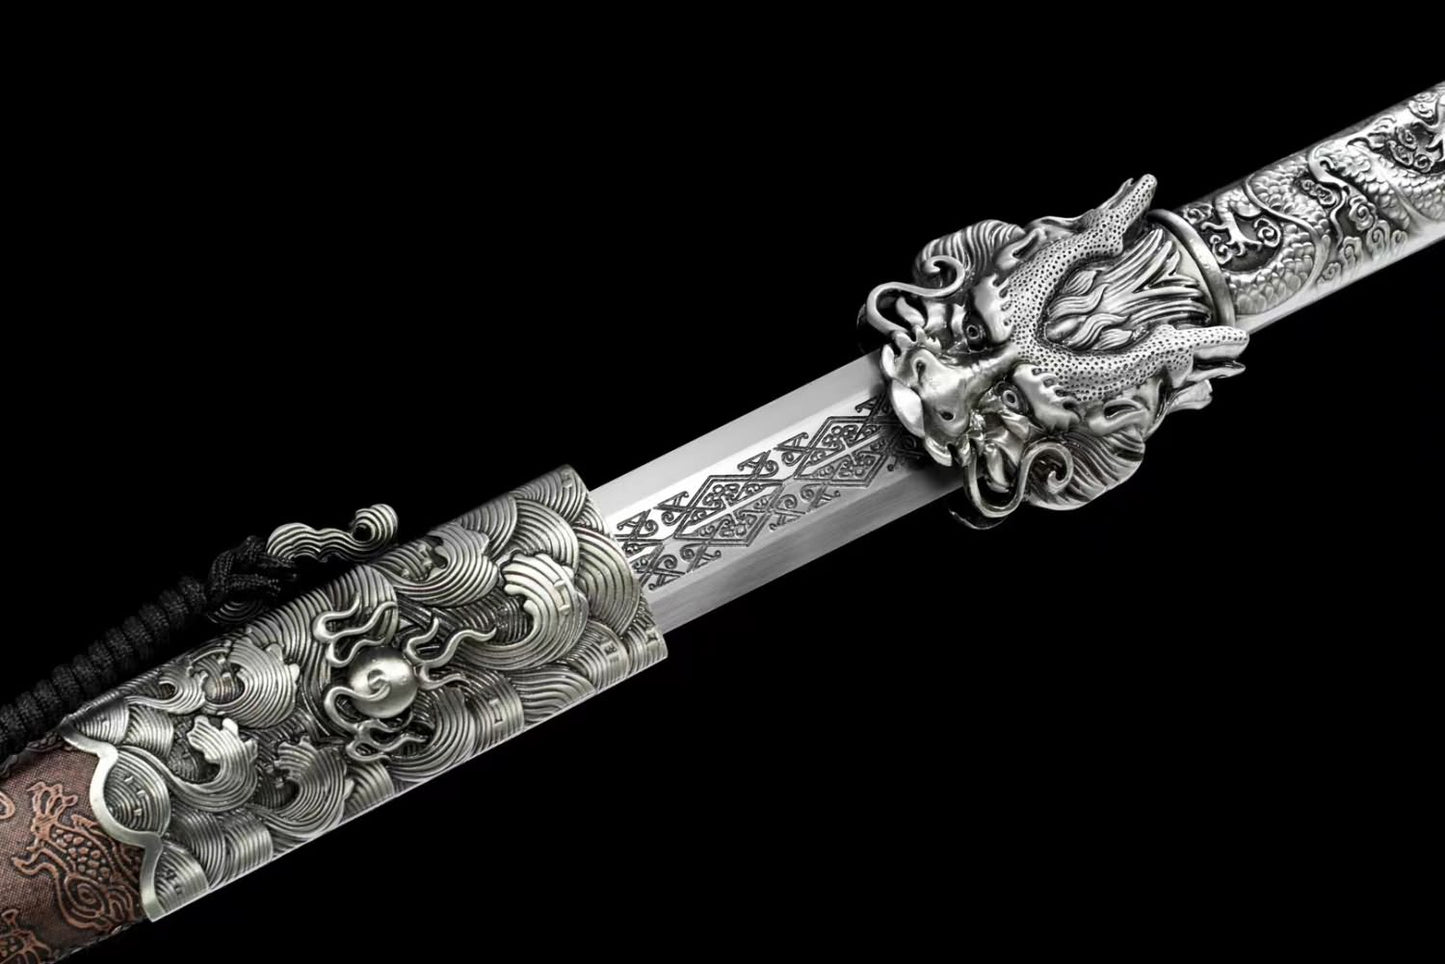 LOONGSWORD,Dragon King Swords with Forged High Carbon Steel Etched Blade-Faux Leather Scabbard